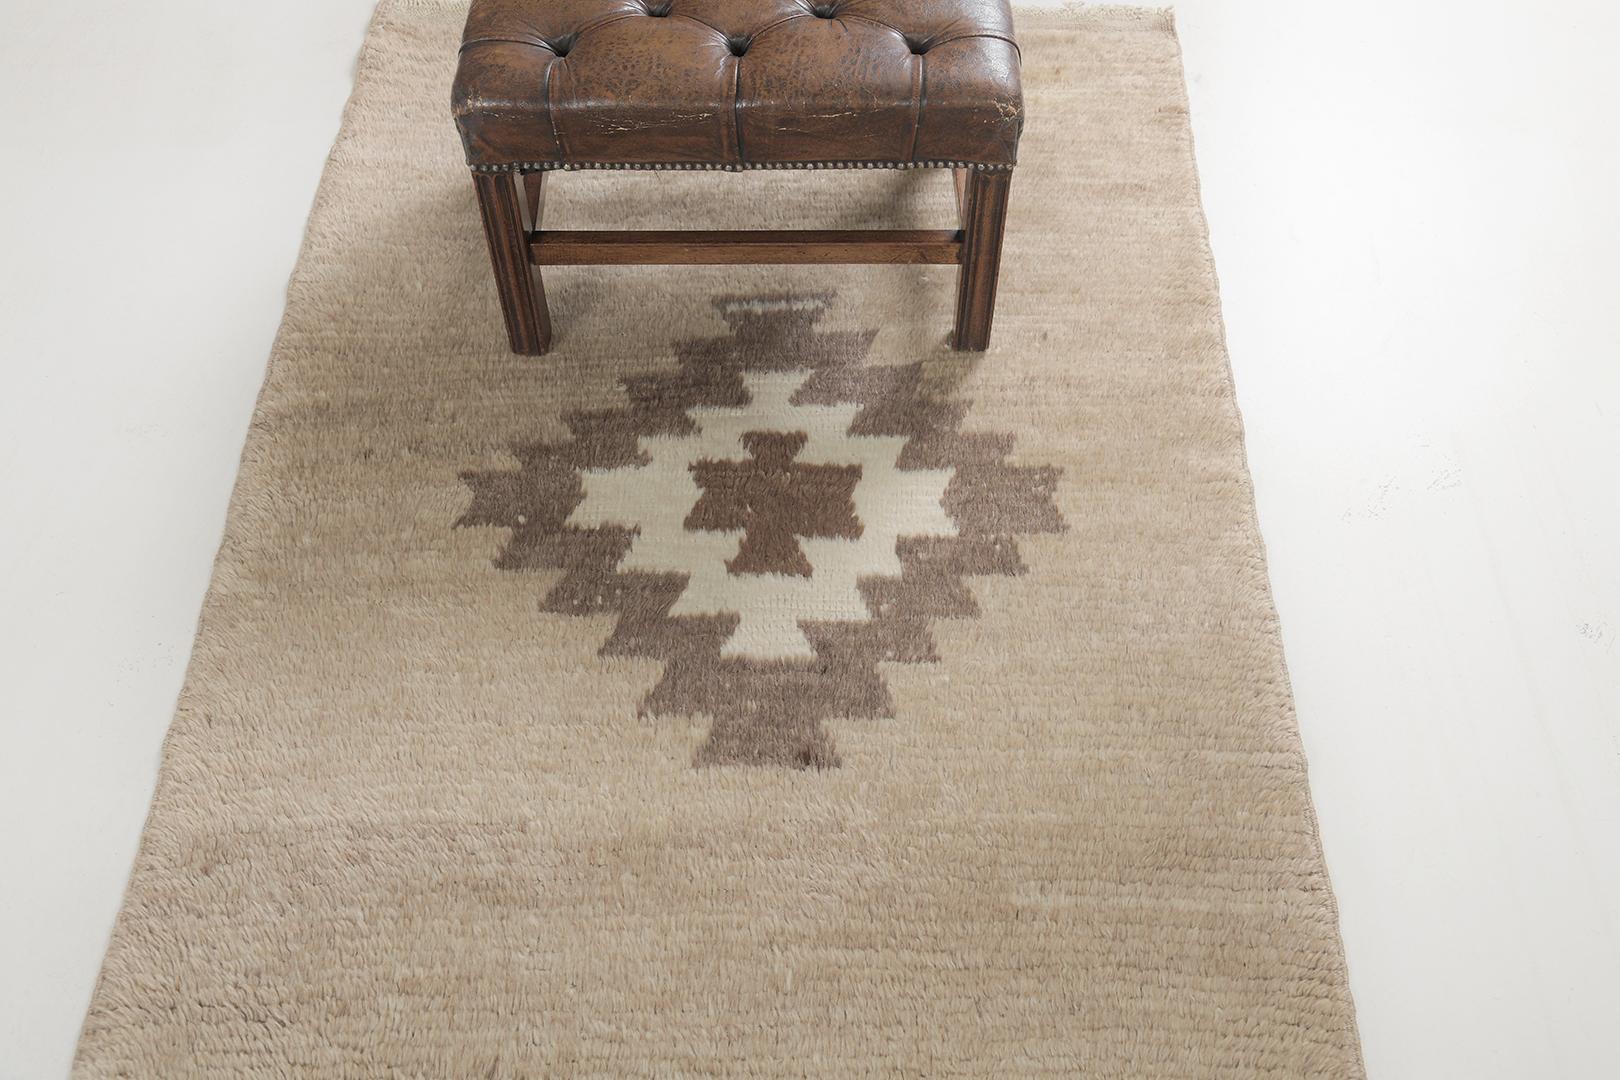 Featuring a gorgeous wool shag of this Vintage Turkish Anatolian Tulu that showcases a muted and captivating earthy tones of beige and cedar brown. This remarkable rug displays a central medallion gloriously accented in the plush field. Given by